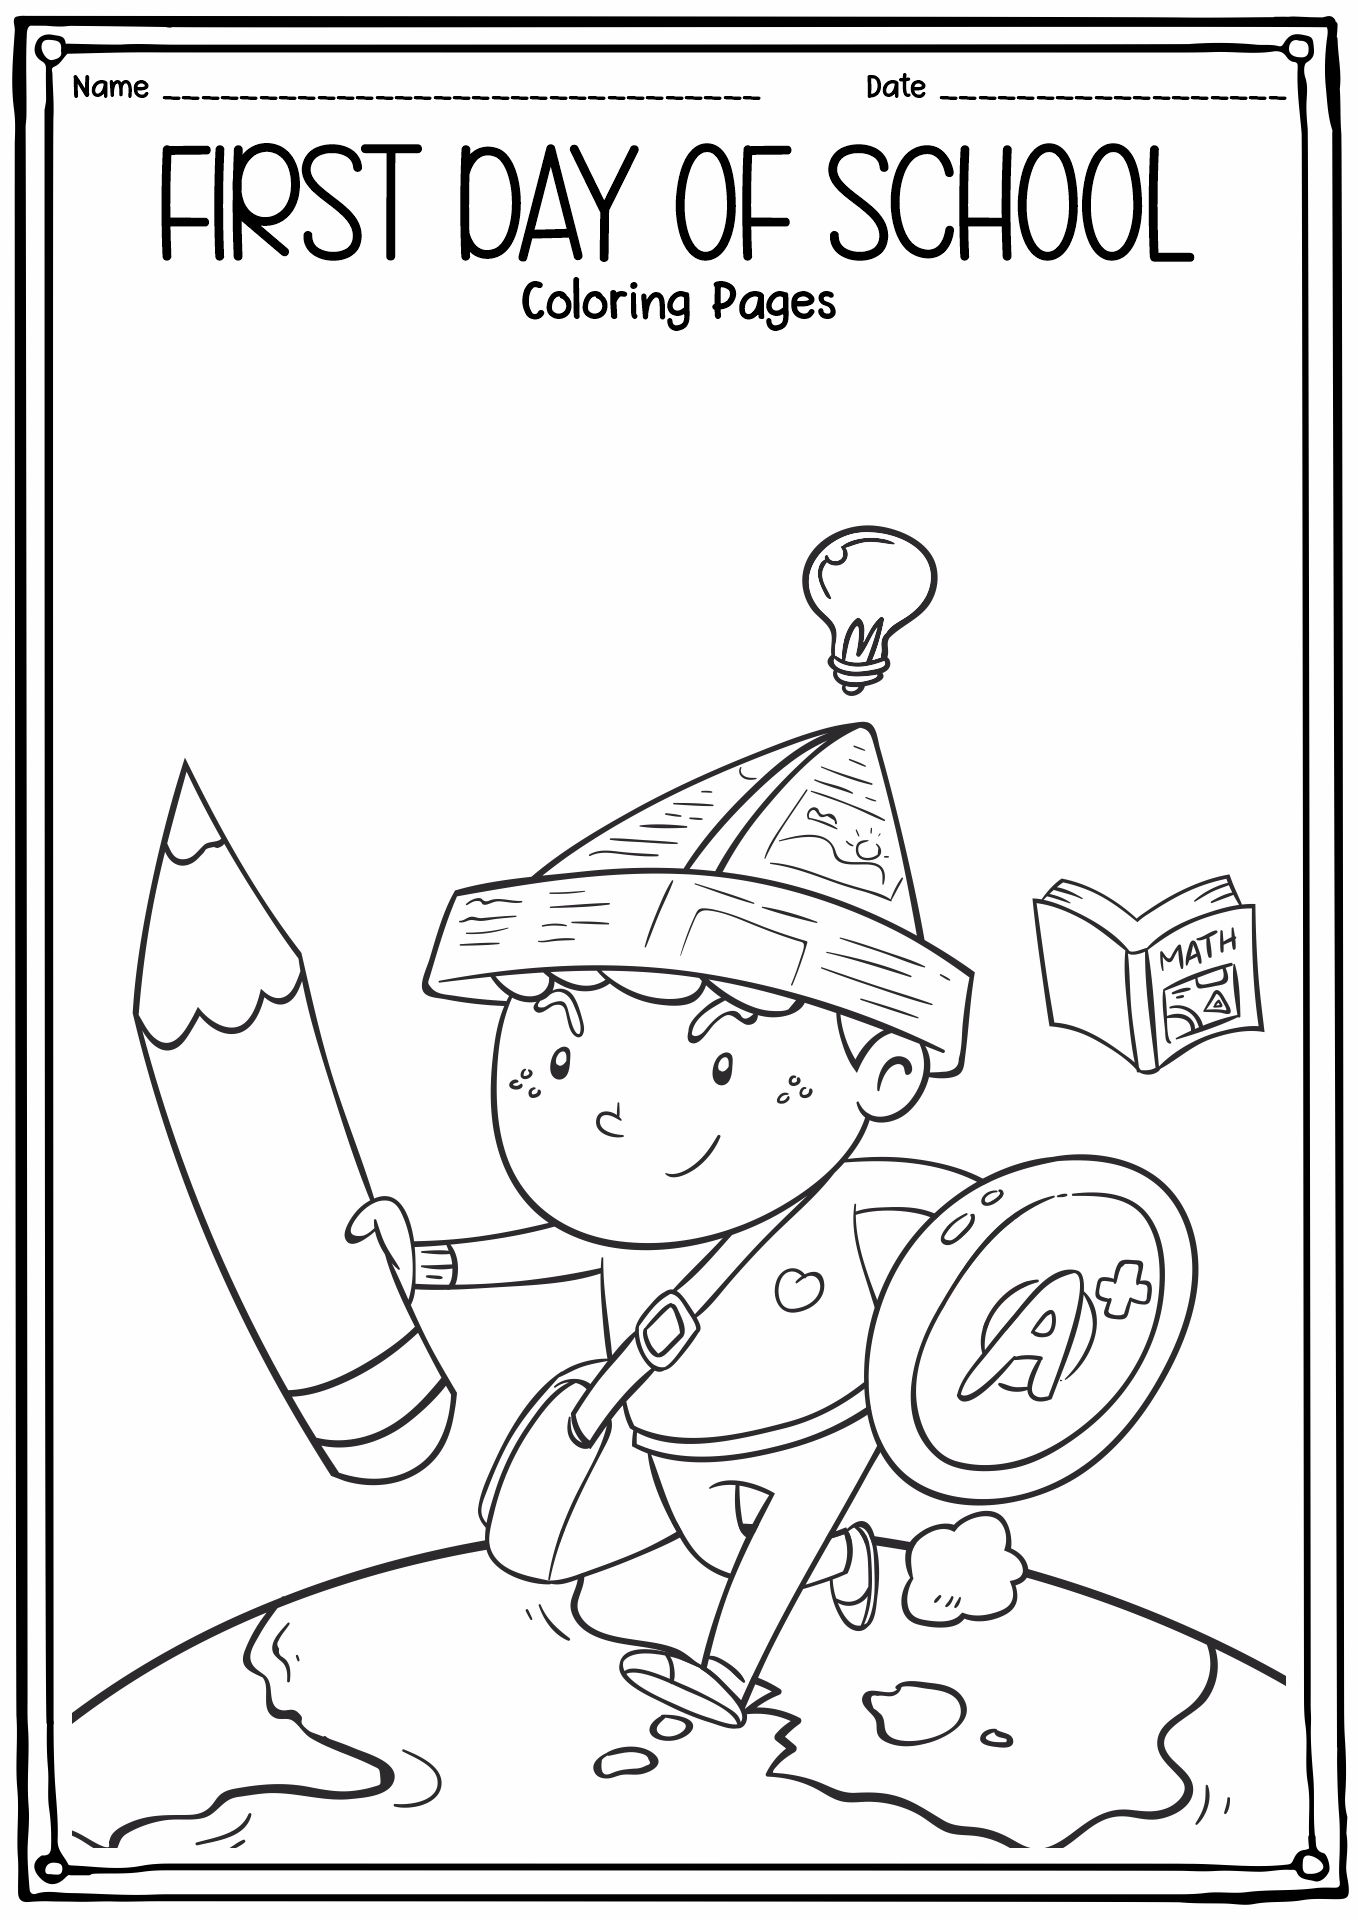 First Day of School 1st Grade Coloring Sheets Image